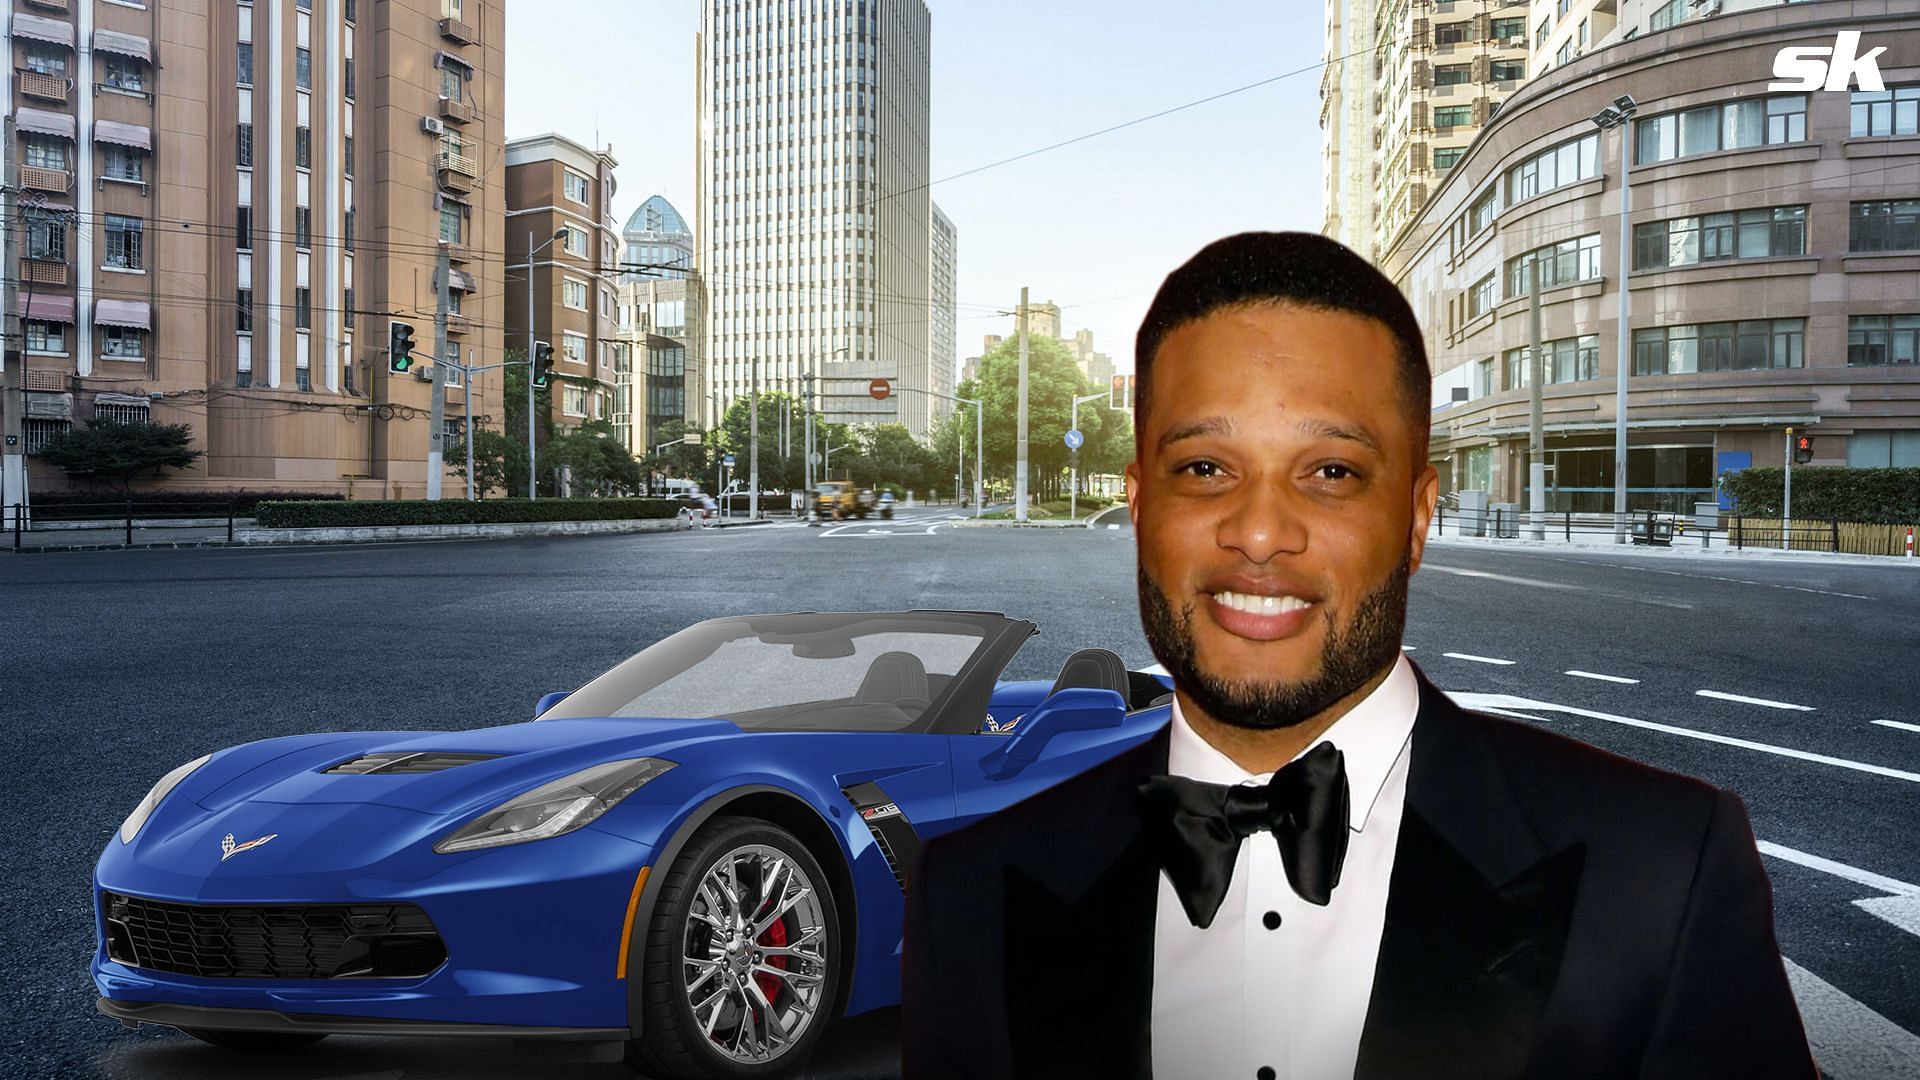 Robinson Cano was rewarded with a sleek new Corvette for his MVP-winning performance at the 2017 All-Star game